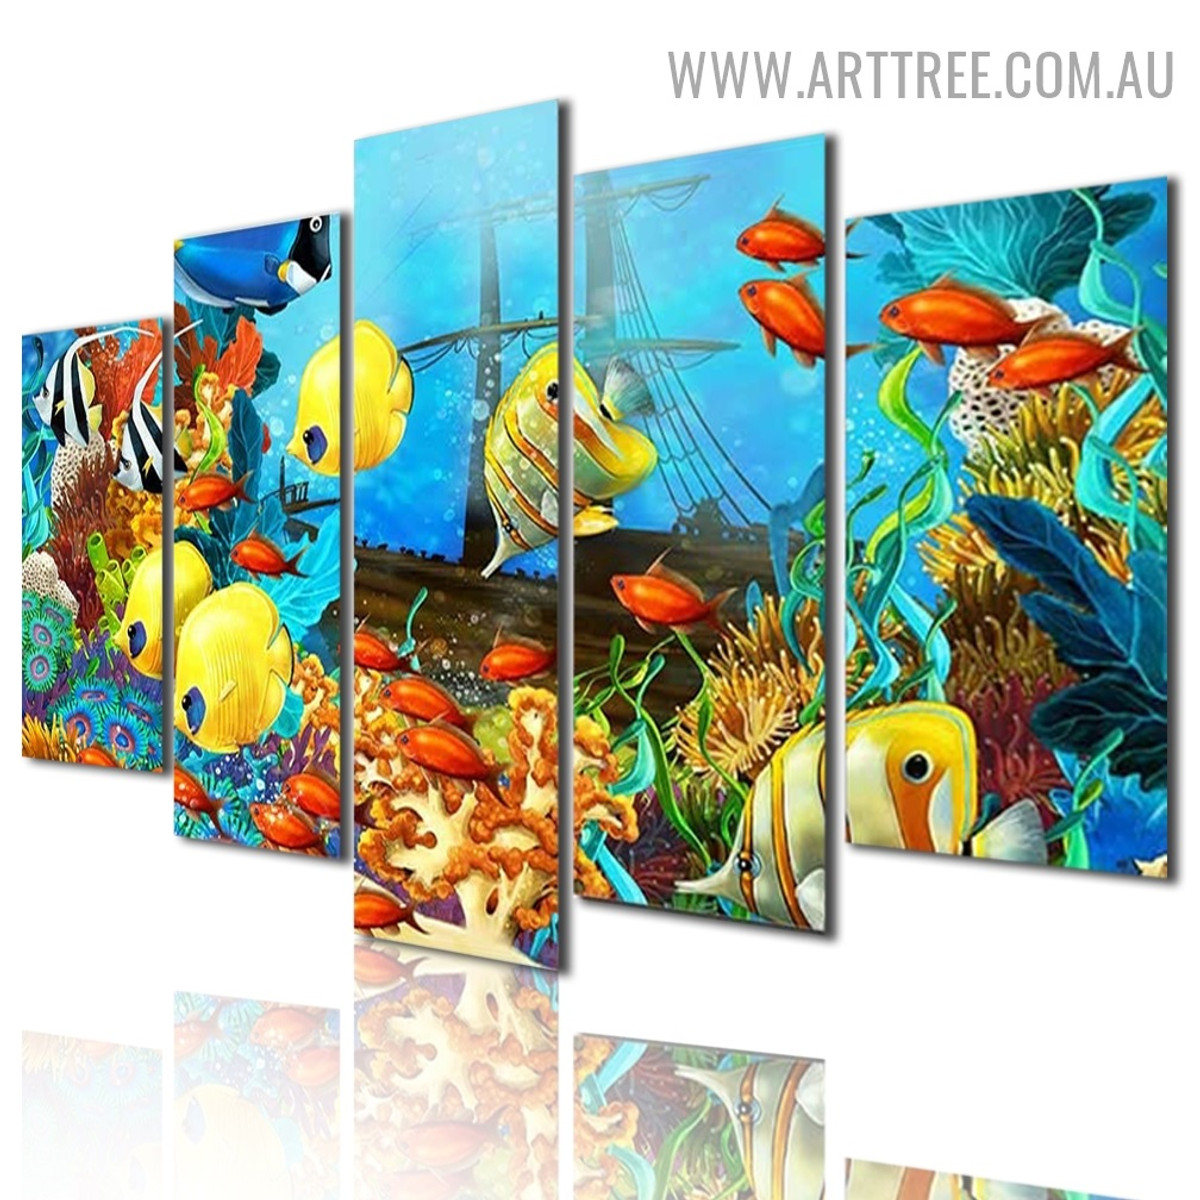 Ocean Fishes Water Animal Modern 5 Piece Over Size Naturescape Artwork Image Canvas Print for Room Wall Assortment